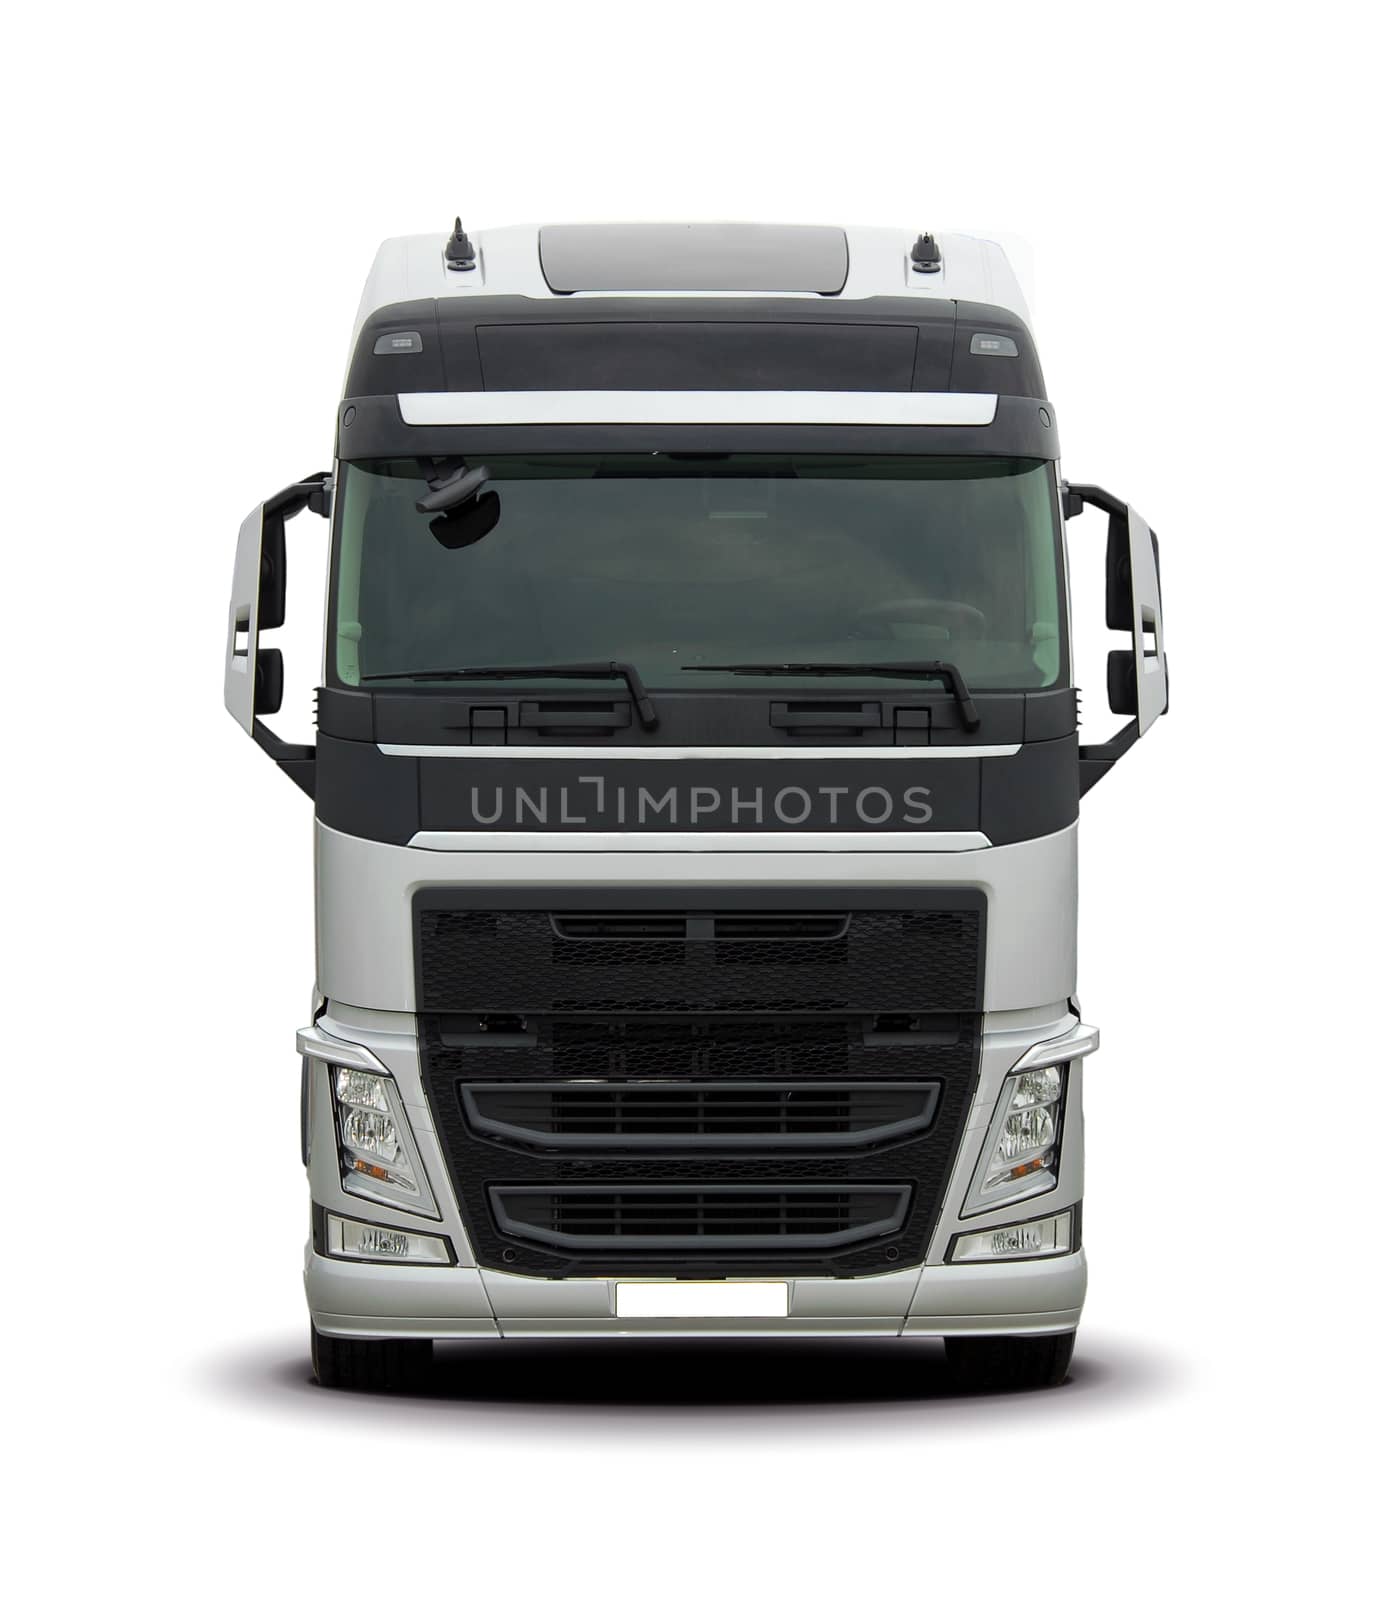 large modern truck on a white background